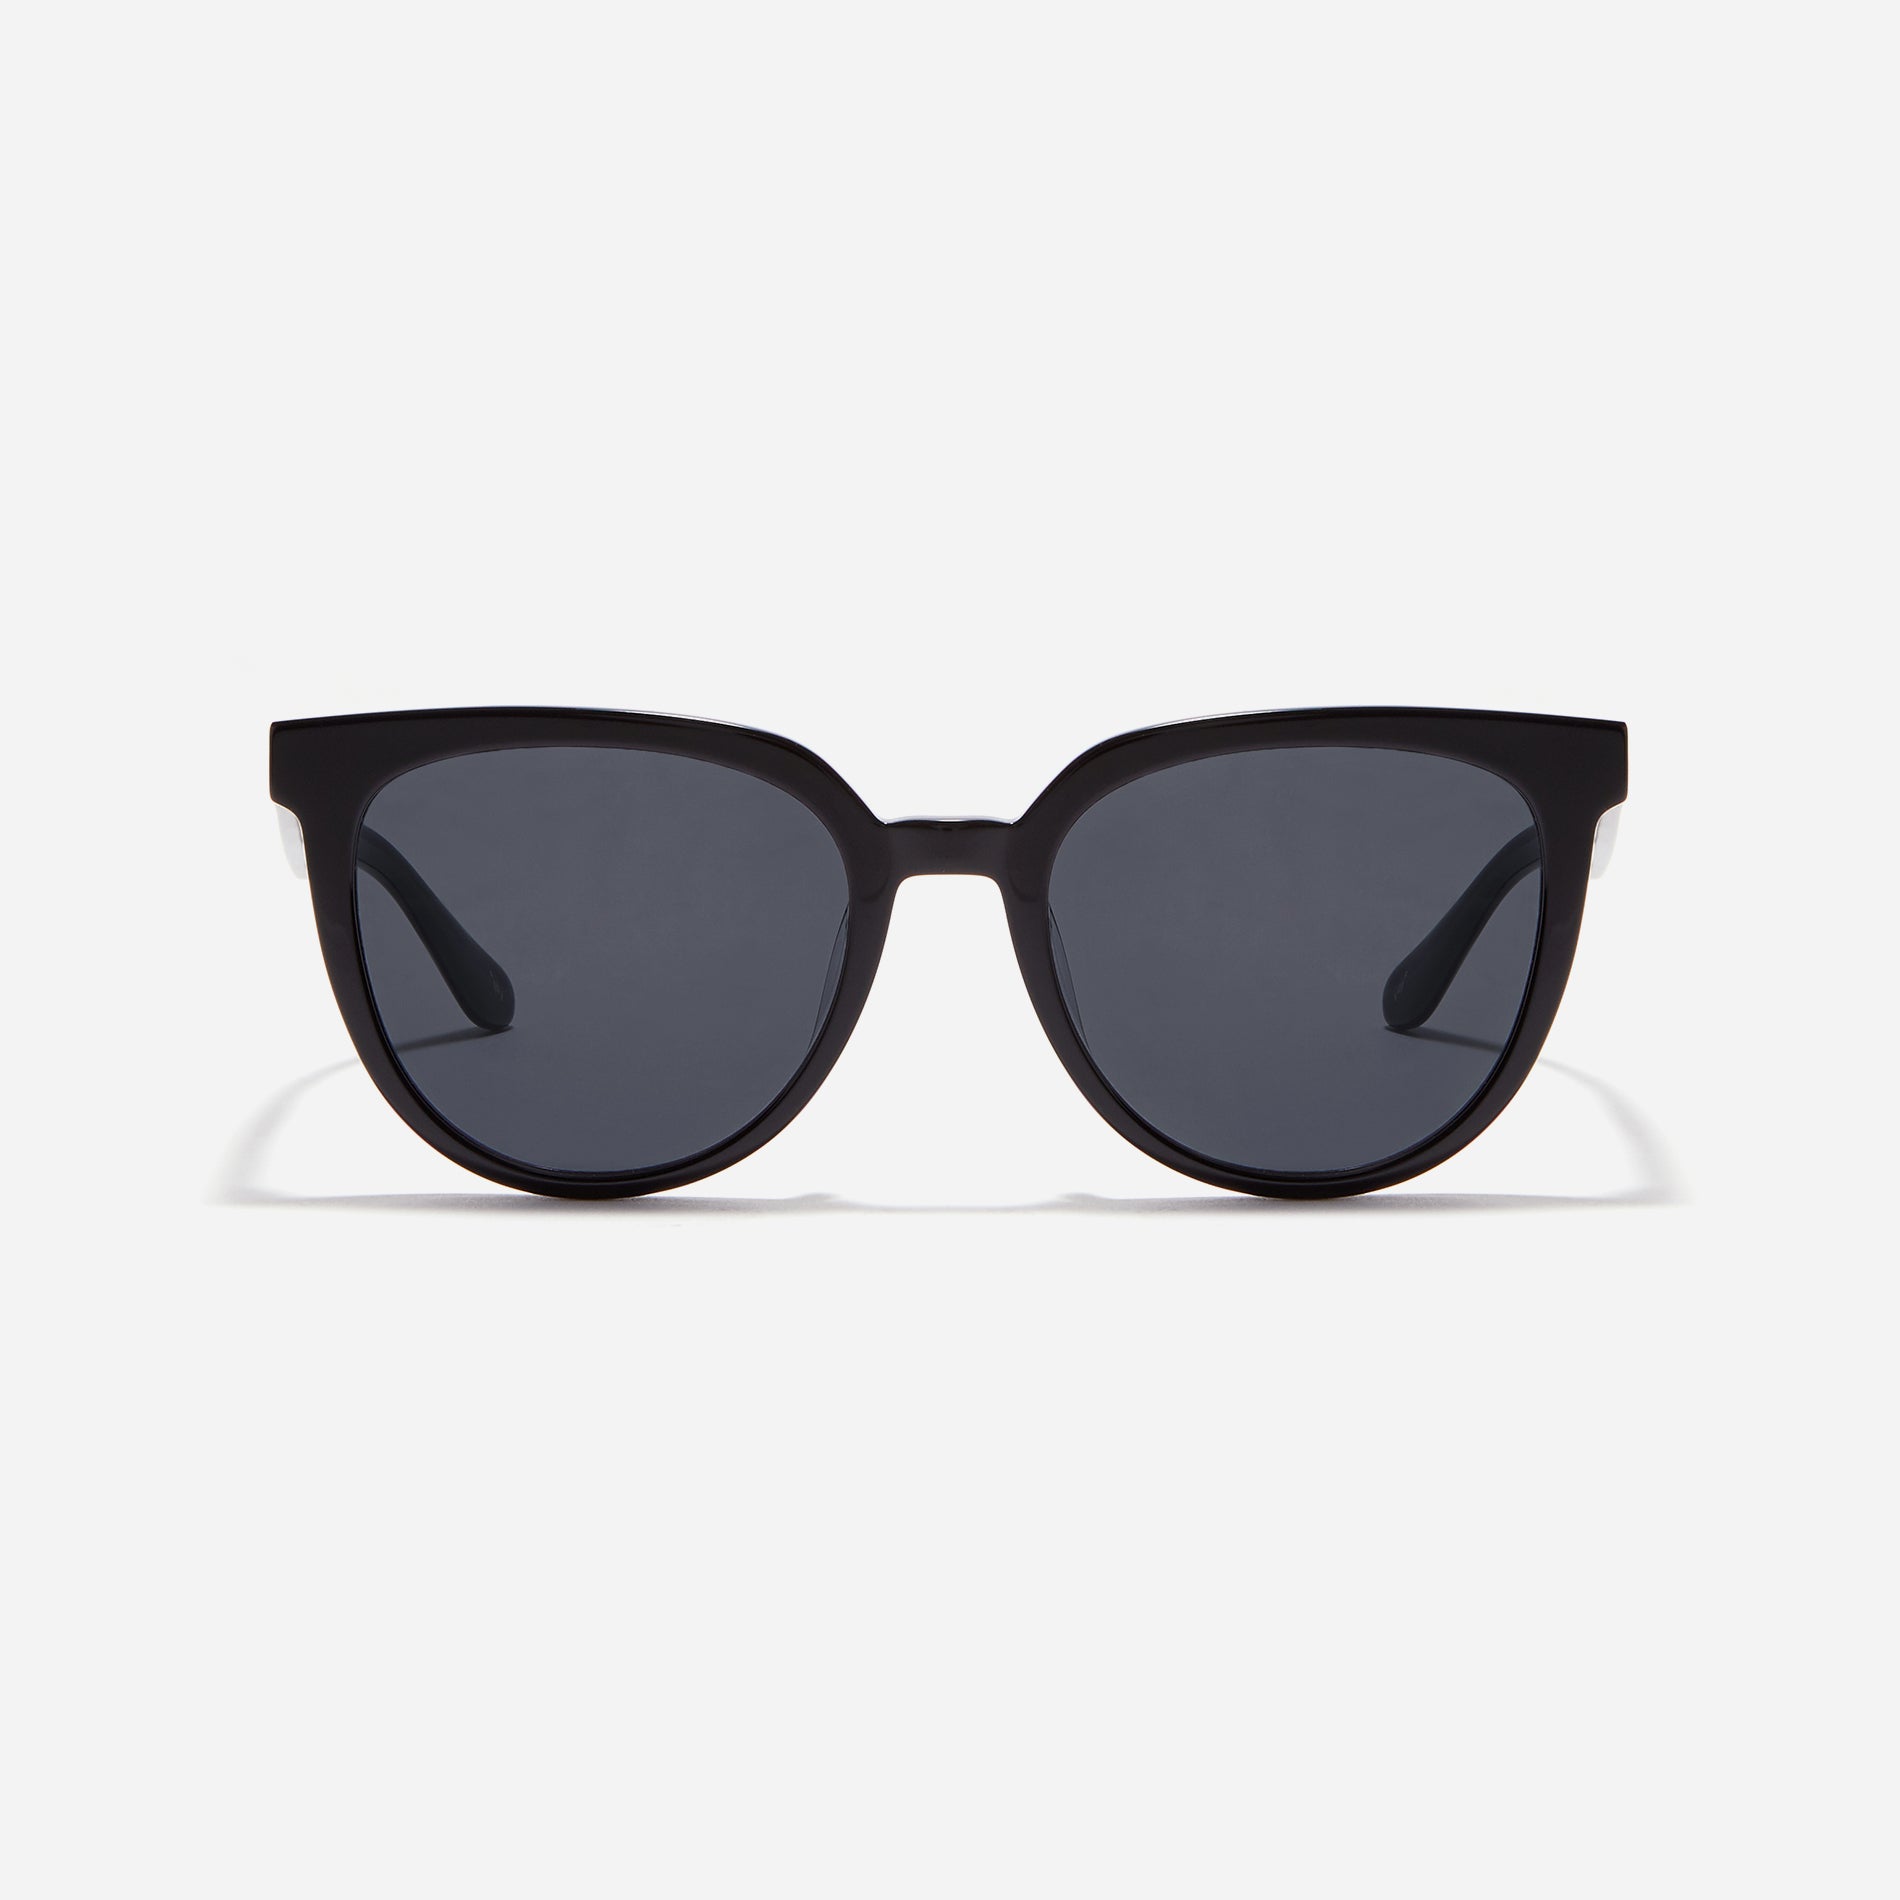 Stylish round-shaped sunglasses with a bold acetate frame and contrasting solid lenses.  Optimized for an Asian fit, the product features bridge and nose pads that prevent slipping, ensuring a comfortable fit.